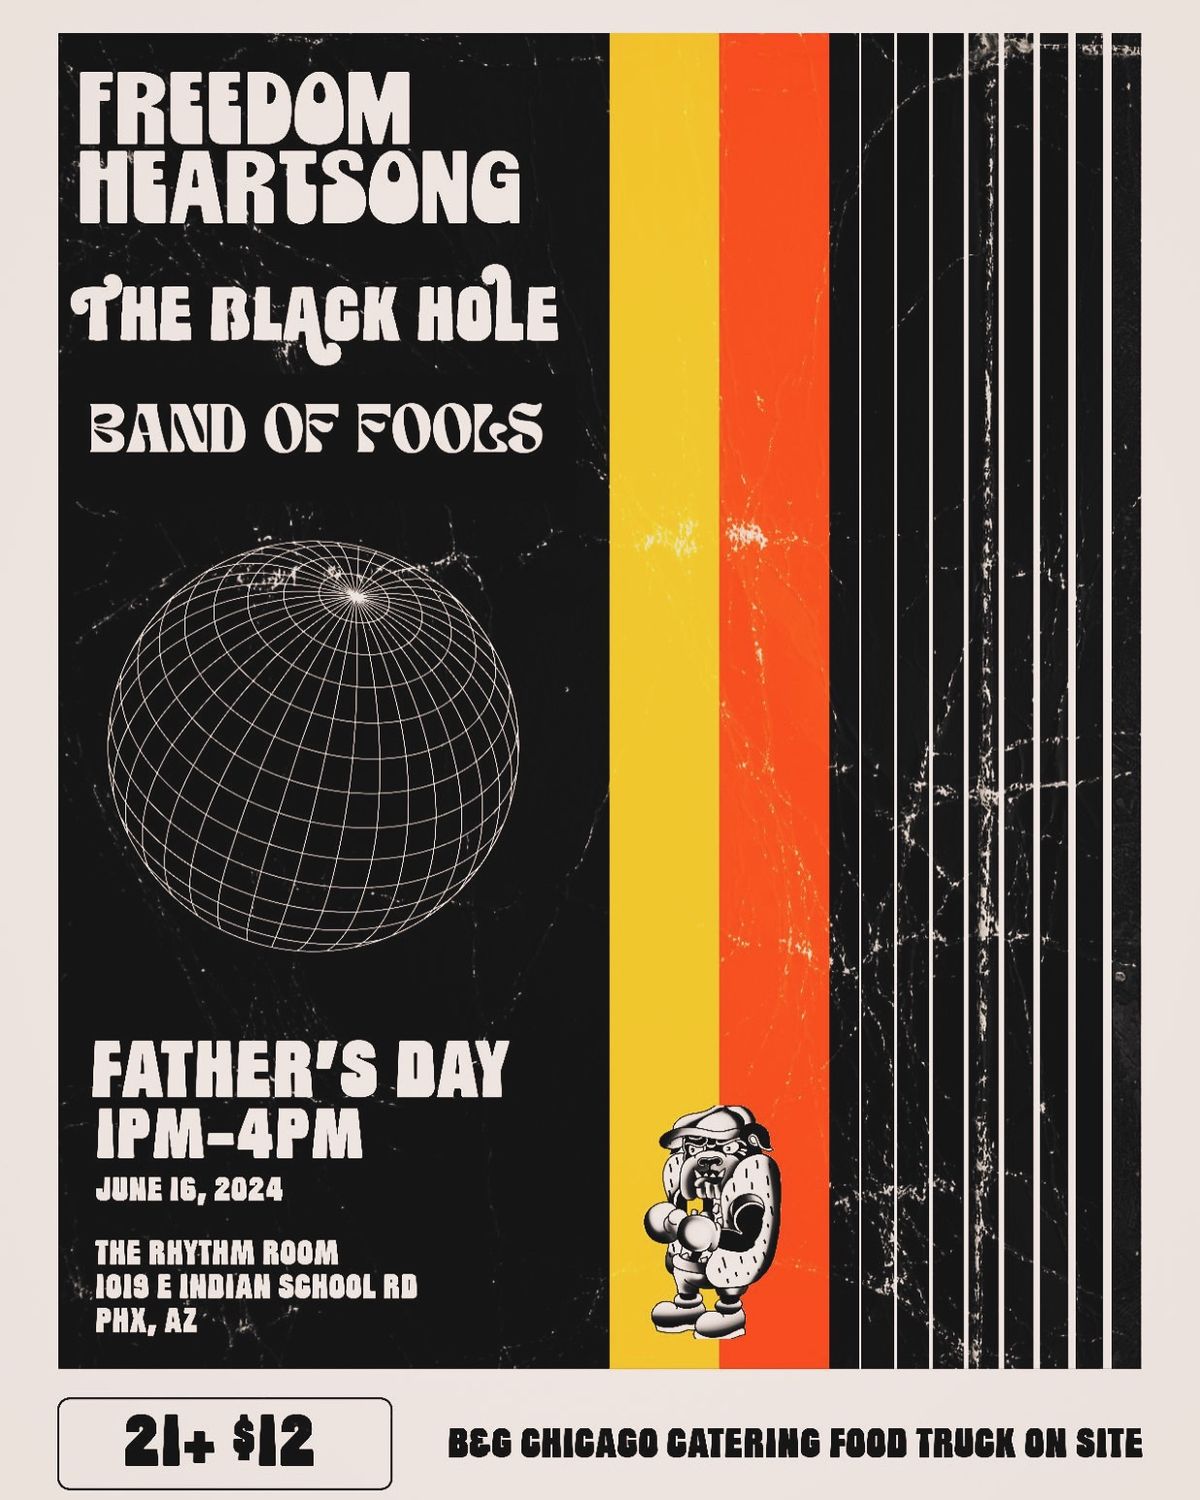 Freedom Heartsong, The Black Hole, & Band of Fools @ Rhythm Room, Father\u2019s Day (6\/16) 1pm-4pm